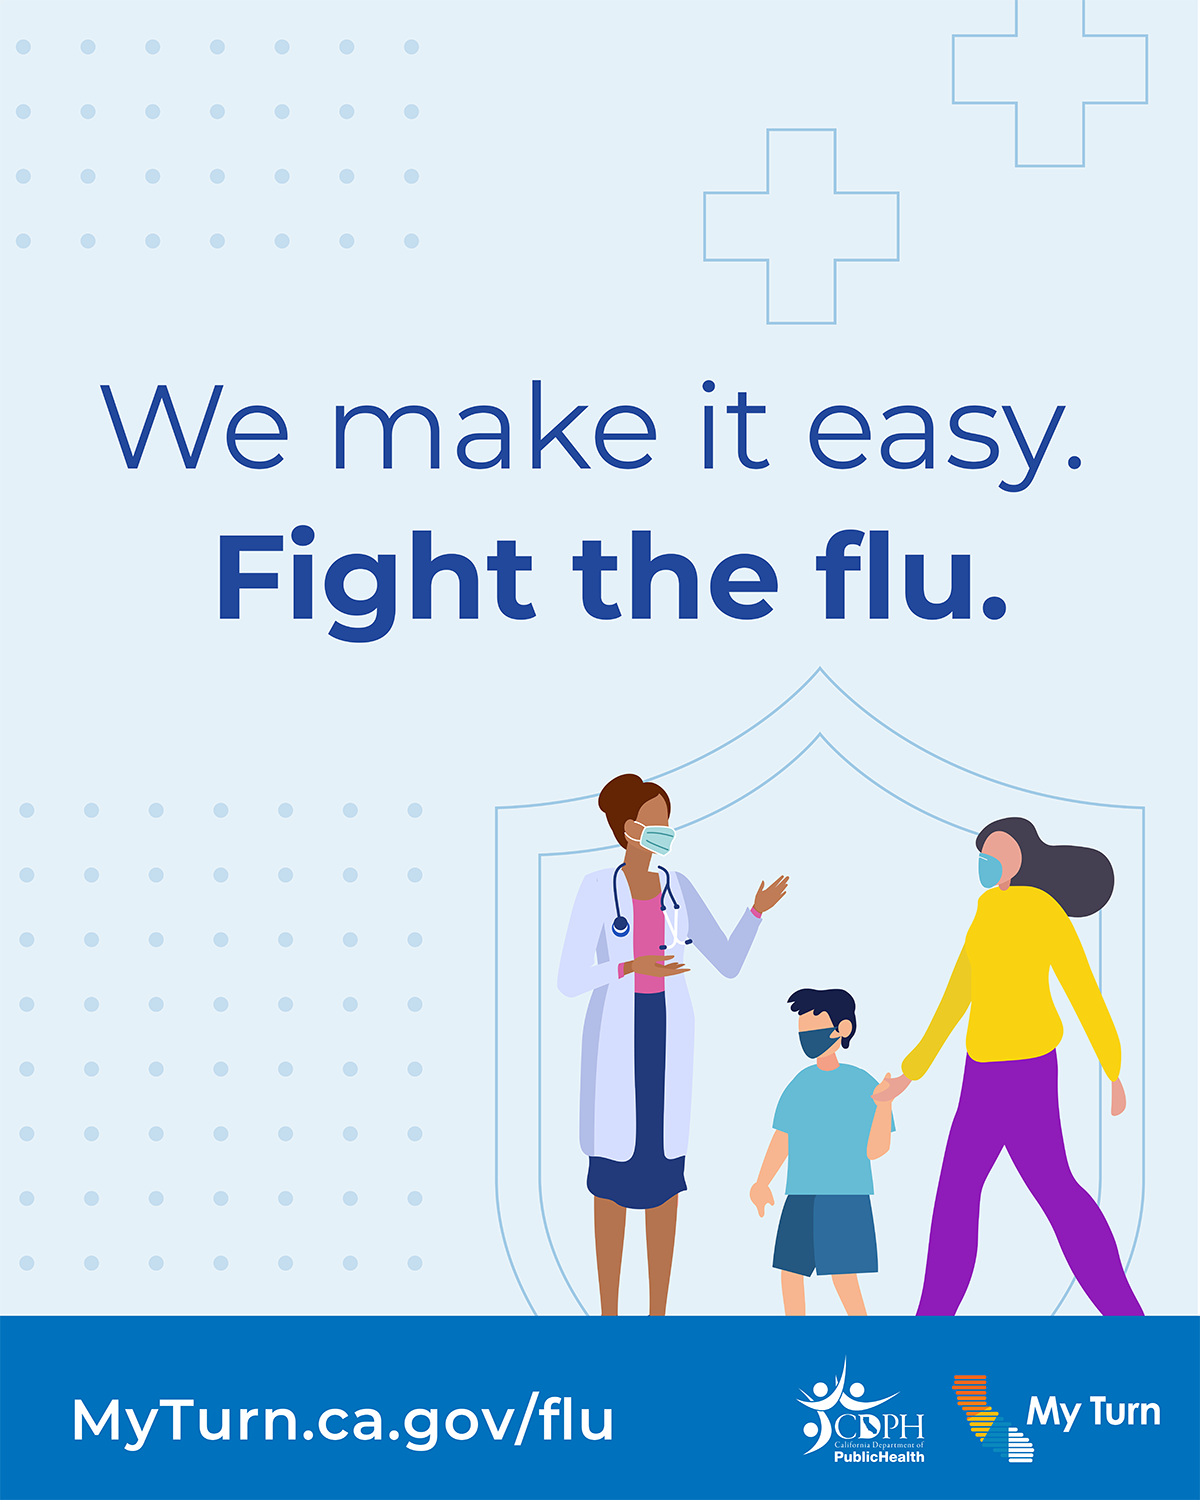 We make it easy. Fight the flu.